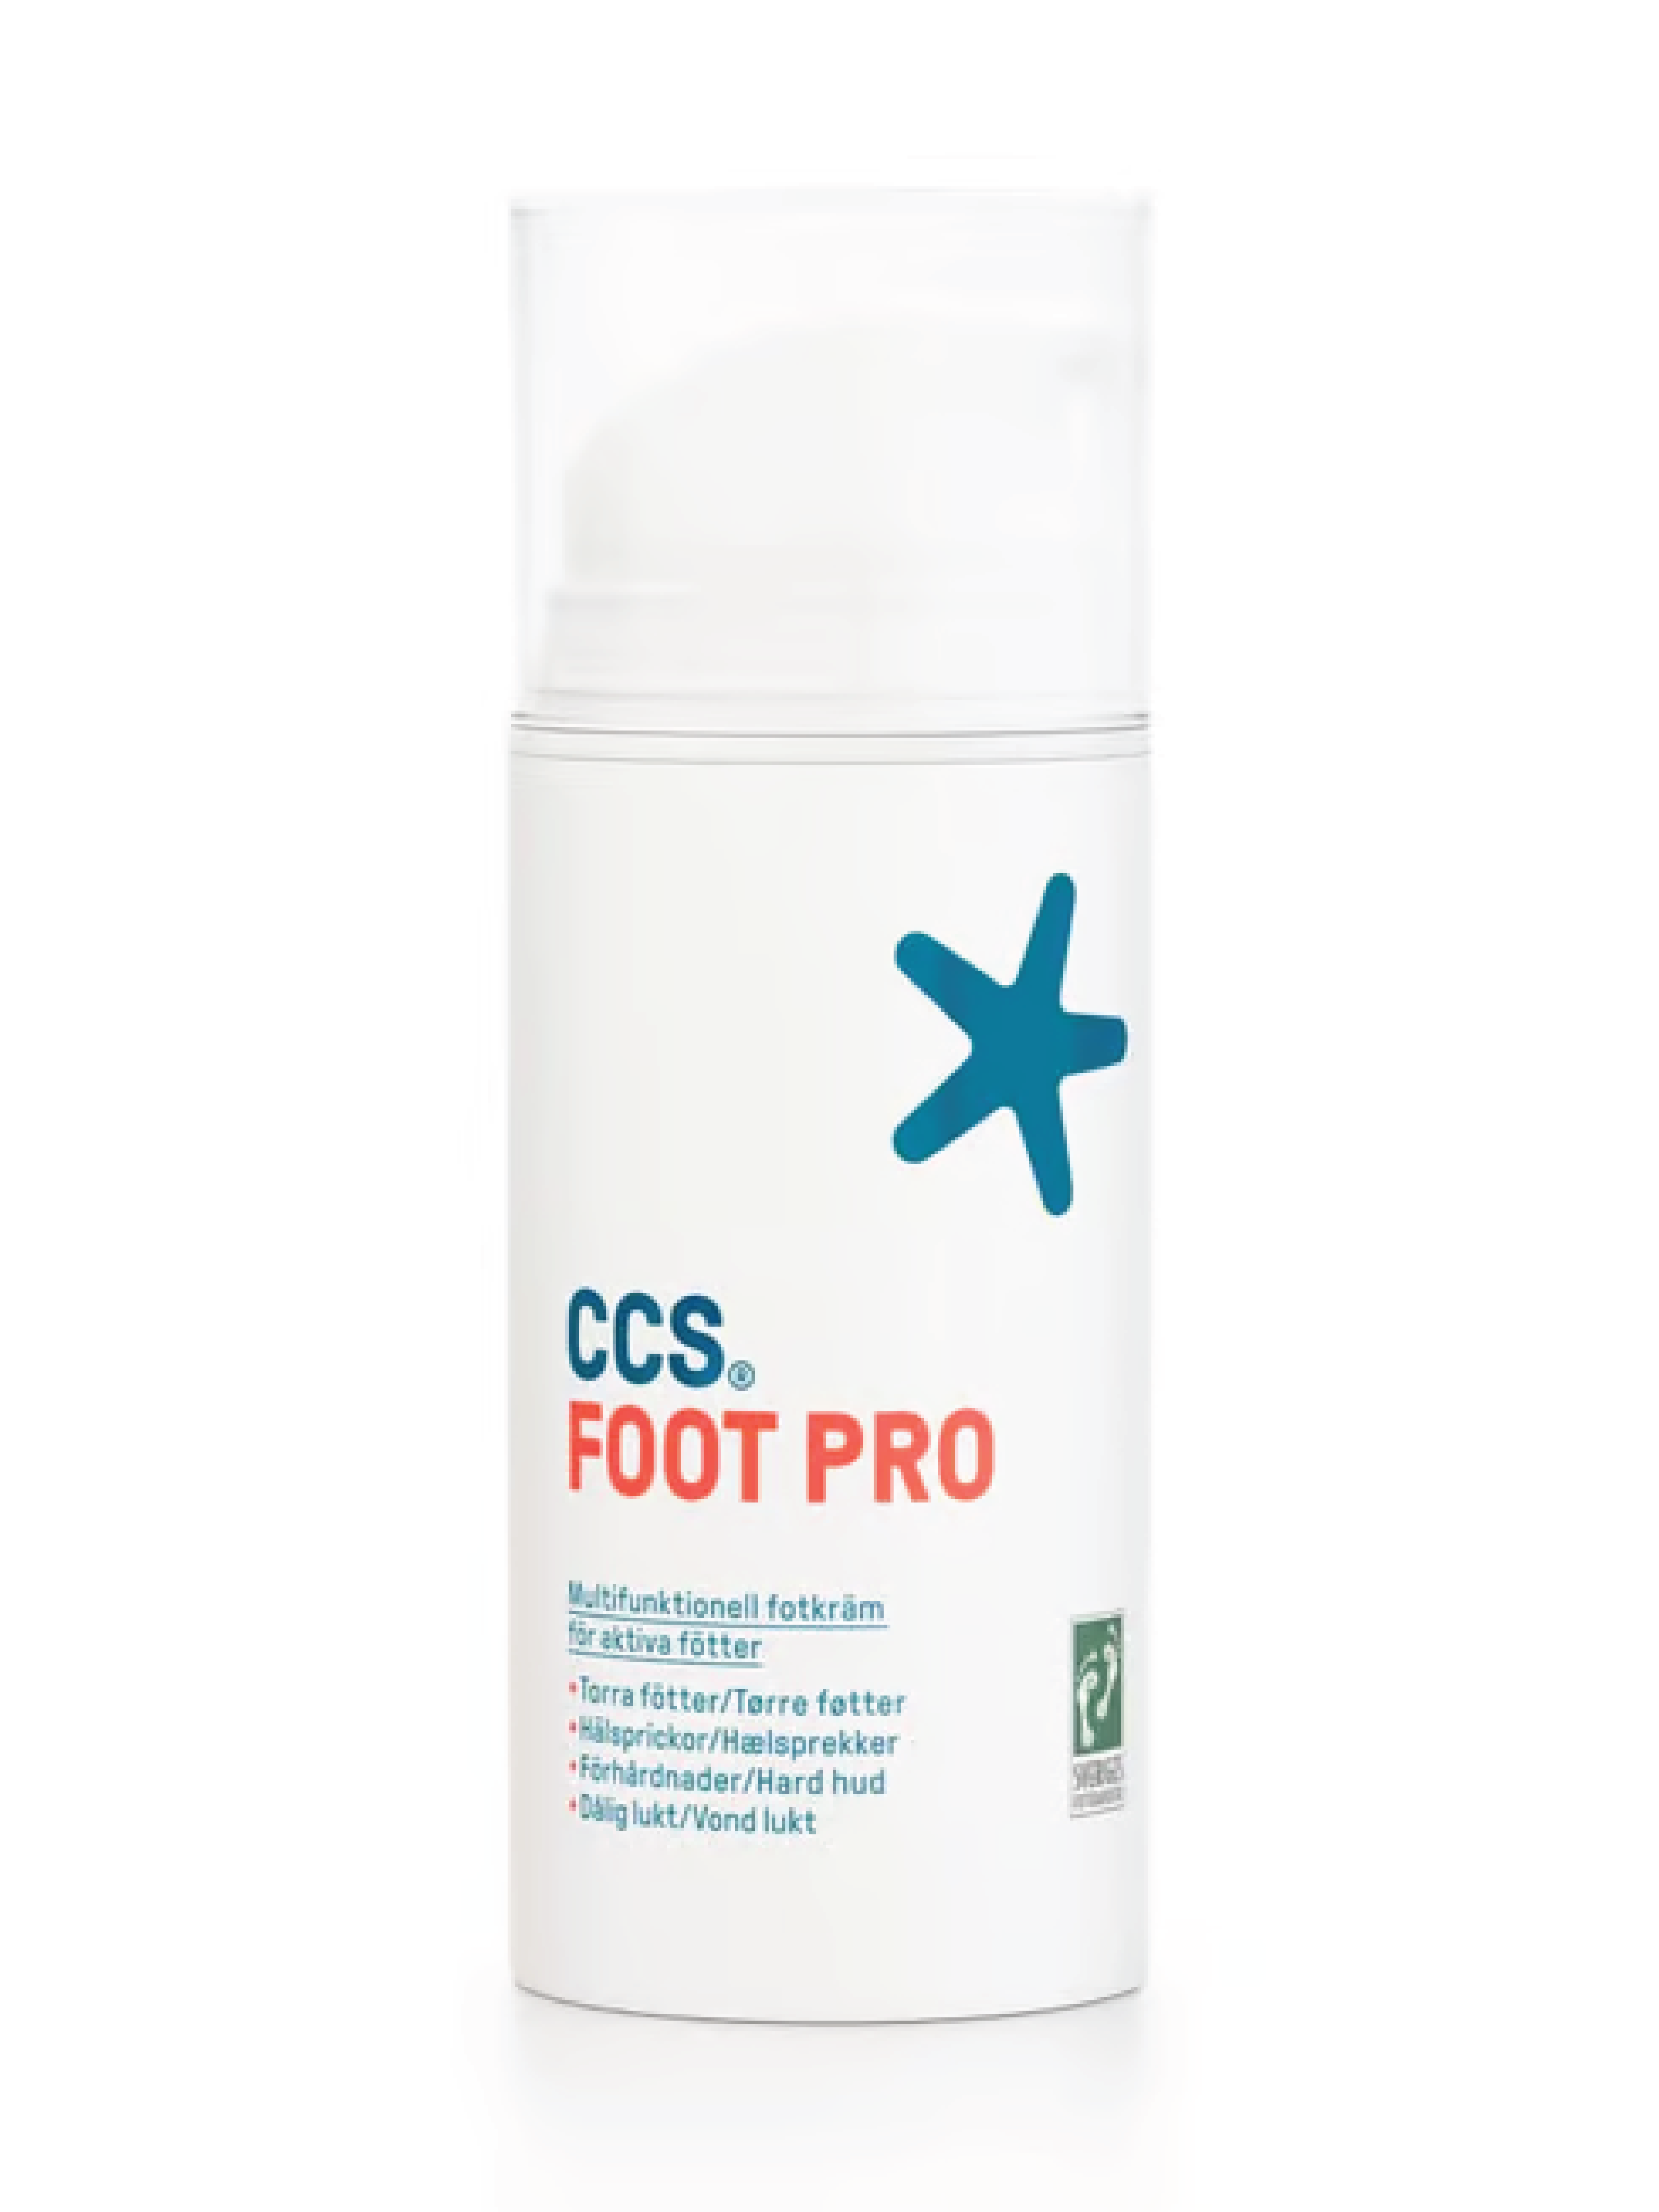 Ccs Foot Pro All in One, 100 ml